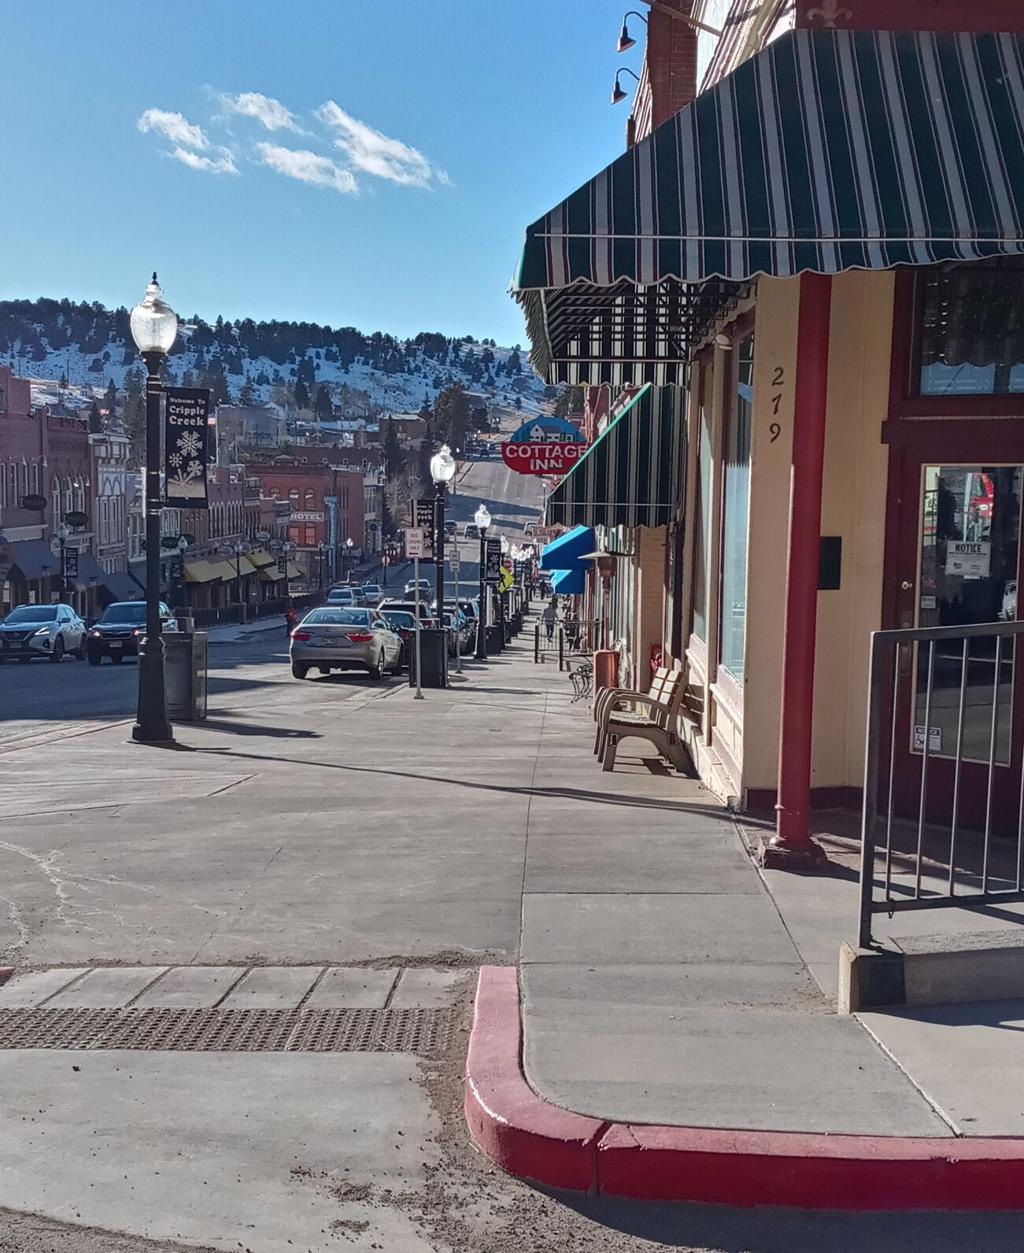 Downtown Cripple Creek, CO  Historic mining town that is still